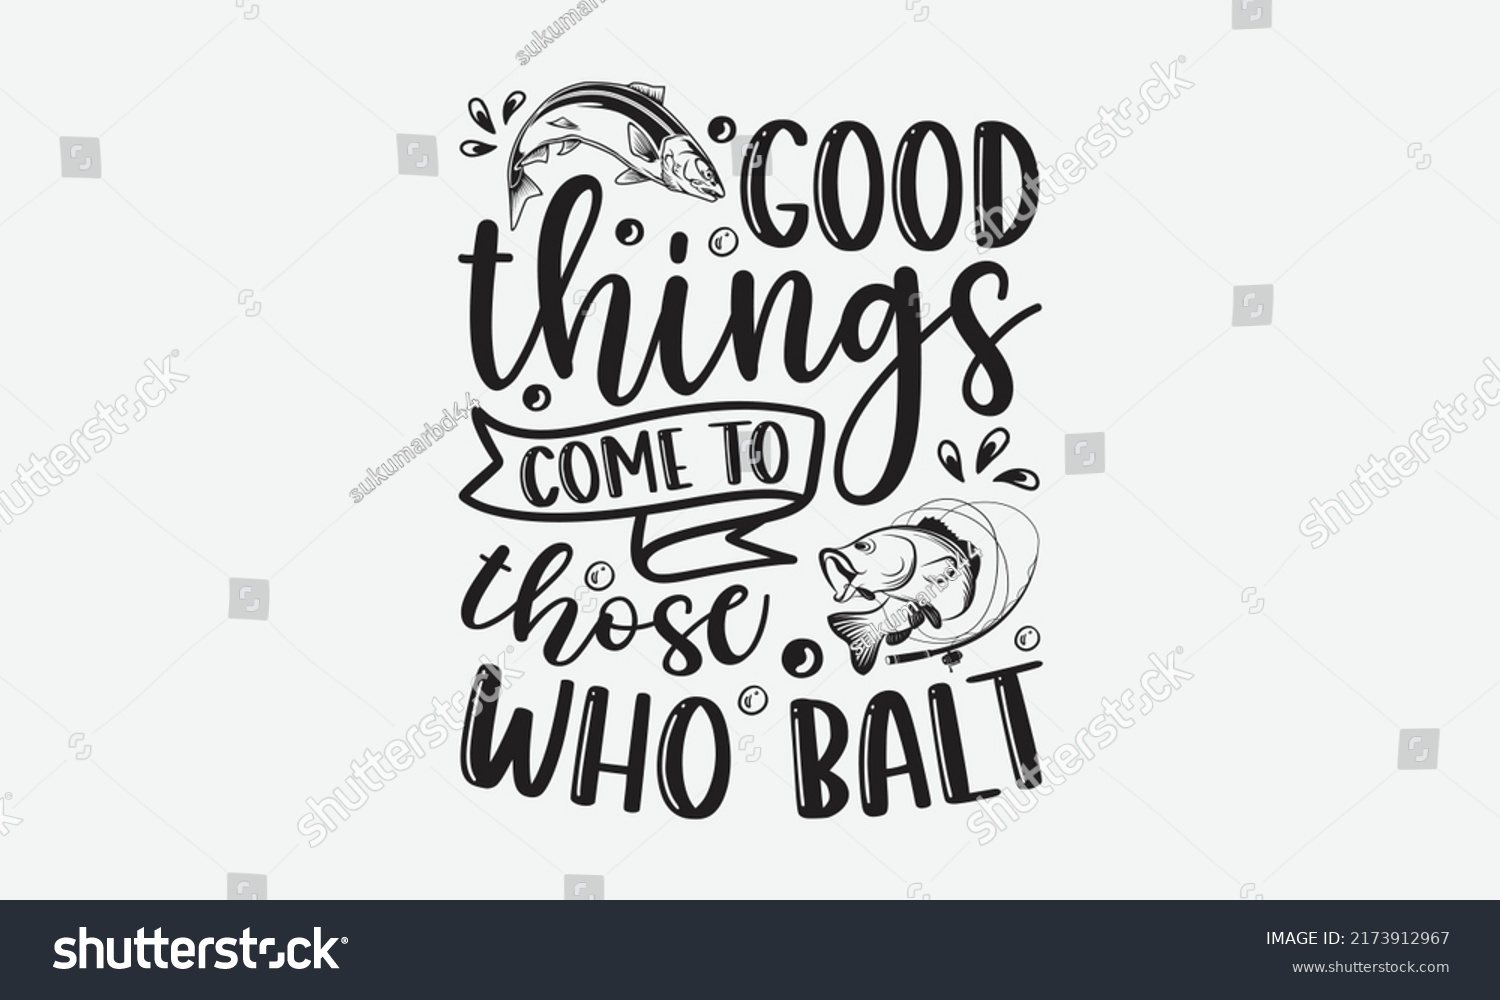 SVG of Good things come to those who balt - Fishing t shirt design, svg eps Files for Cutting, Handmade calligraphy vector illustration, Hand written vector sign, svg svg